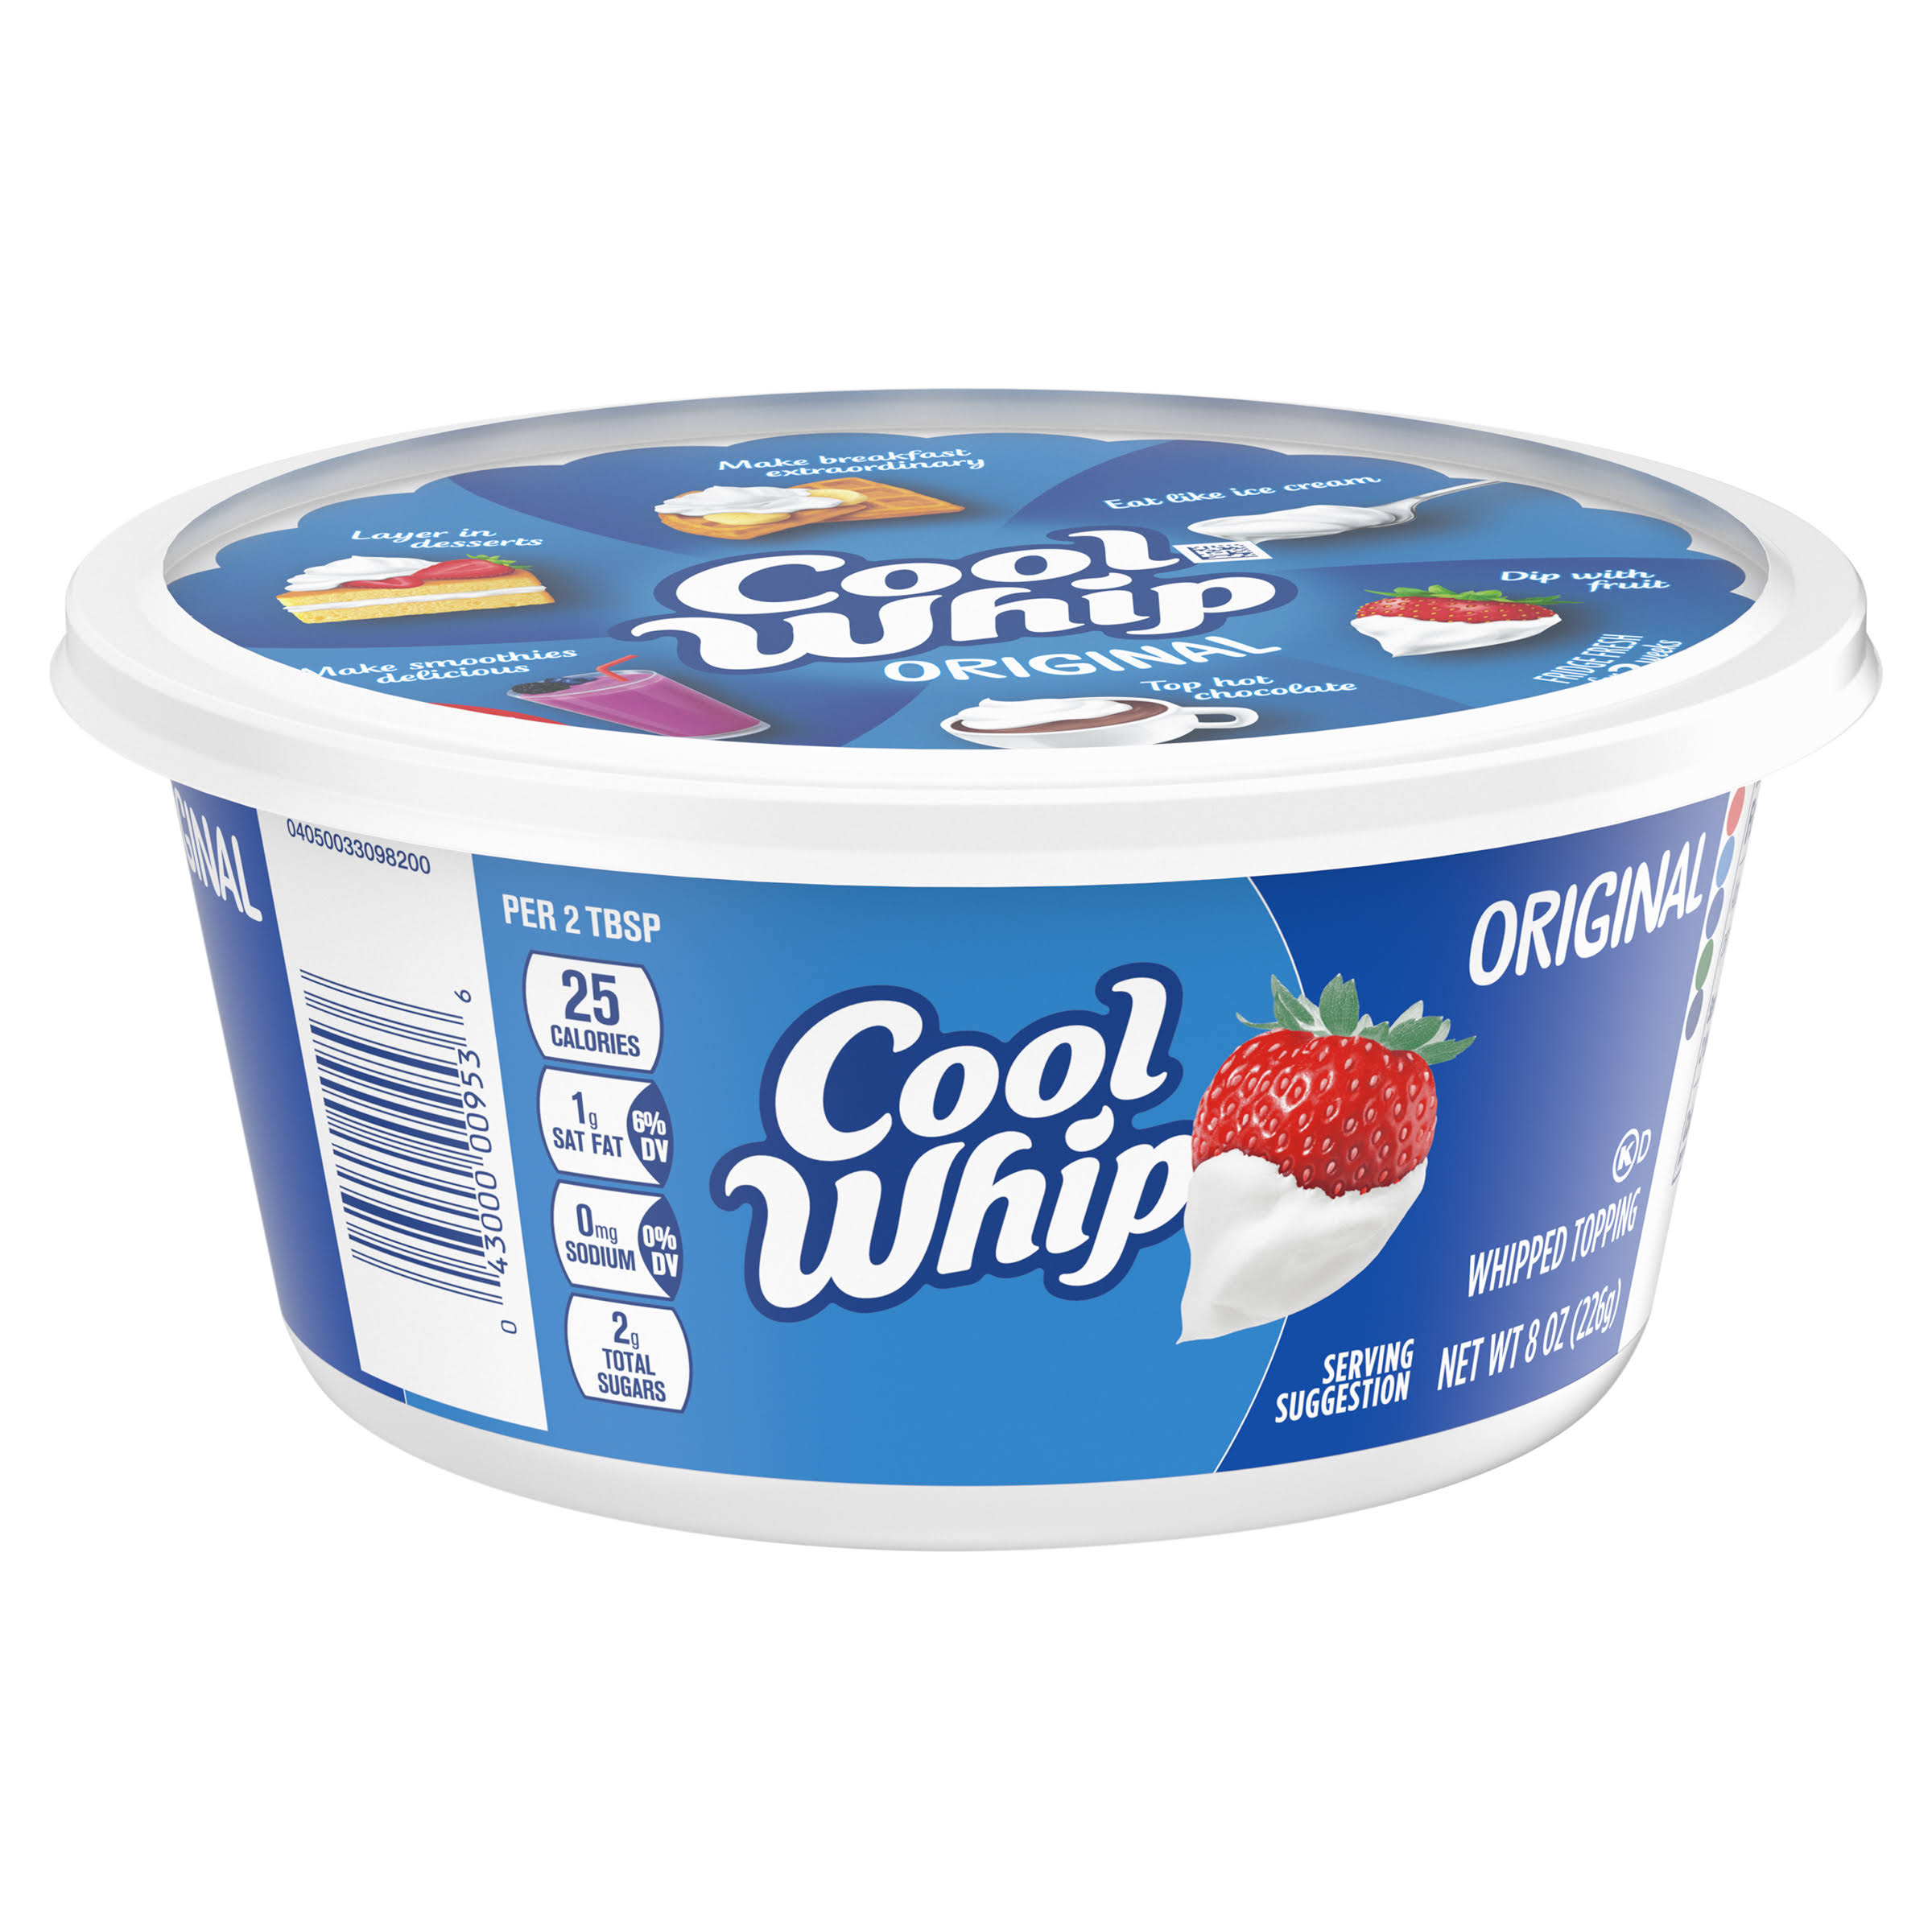 Cool Whip Original Whipped Topping - 8 oz